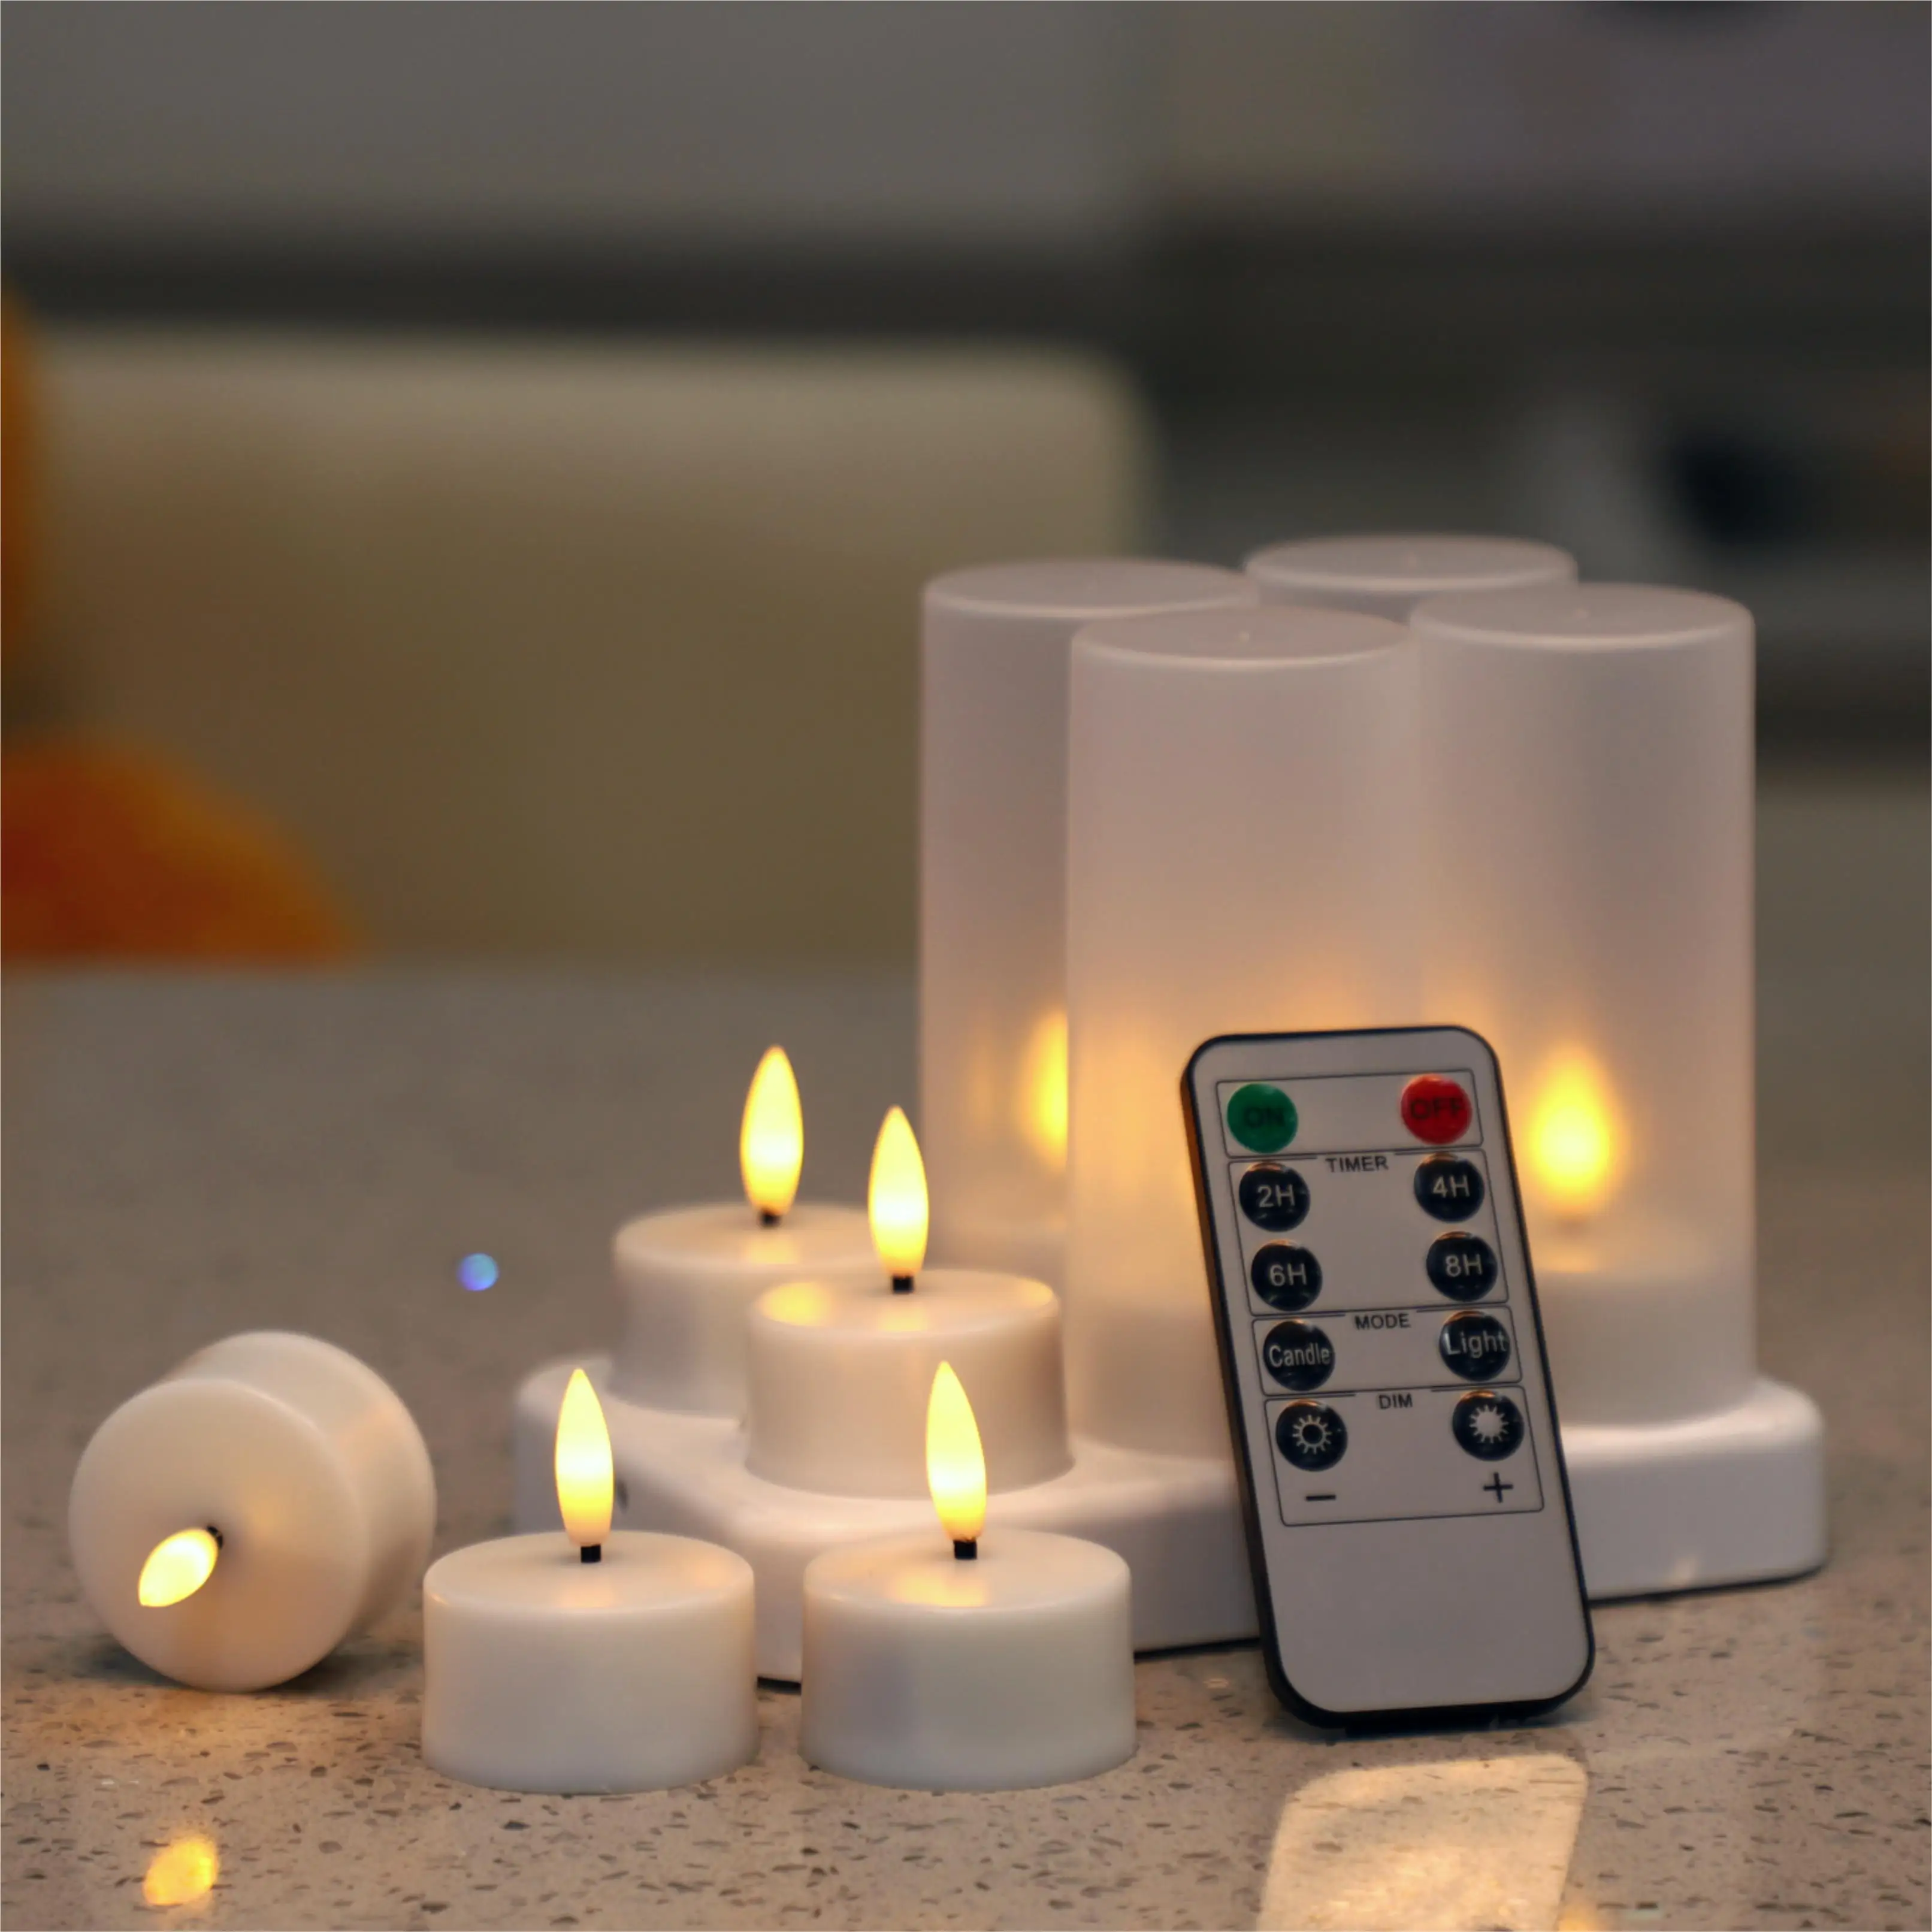 

3D Black Wick Set 6 Remote Control Flickering Flameless Valentines Christmas Gifts Rechargeable Led Tea Light Candles